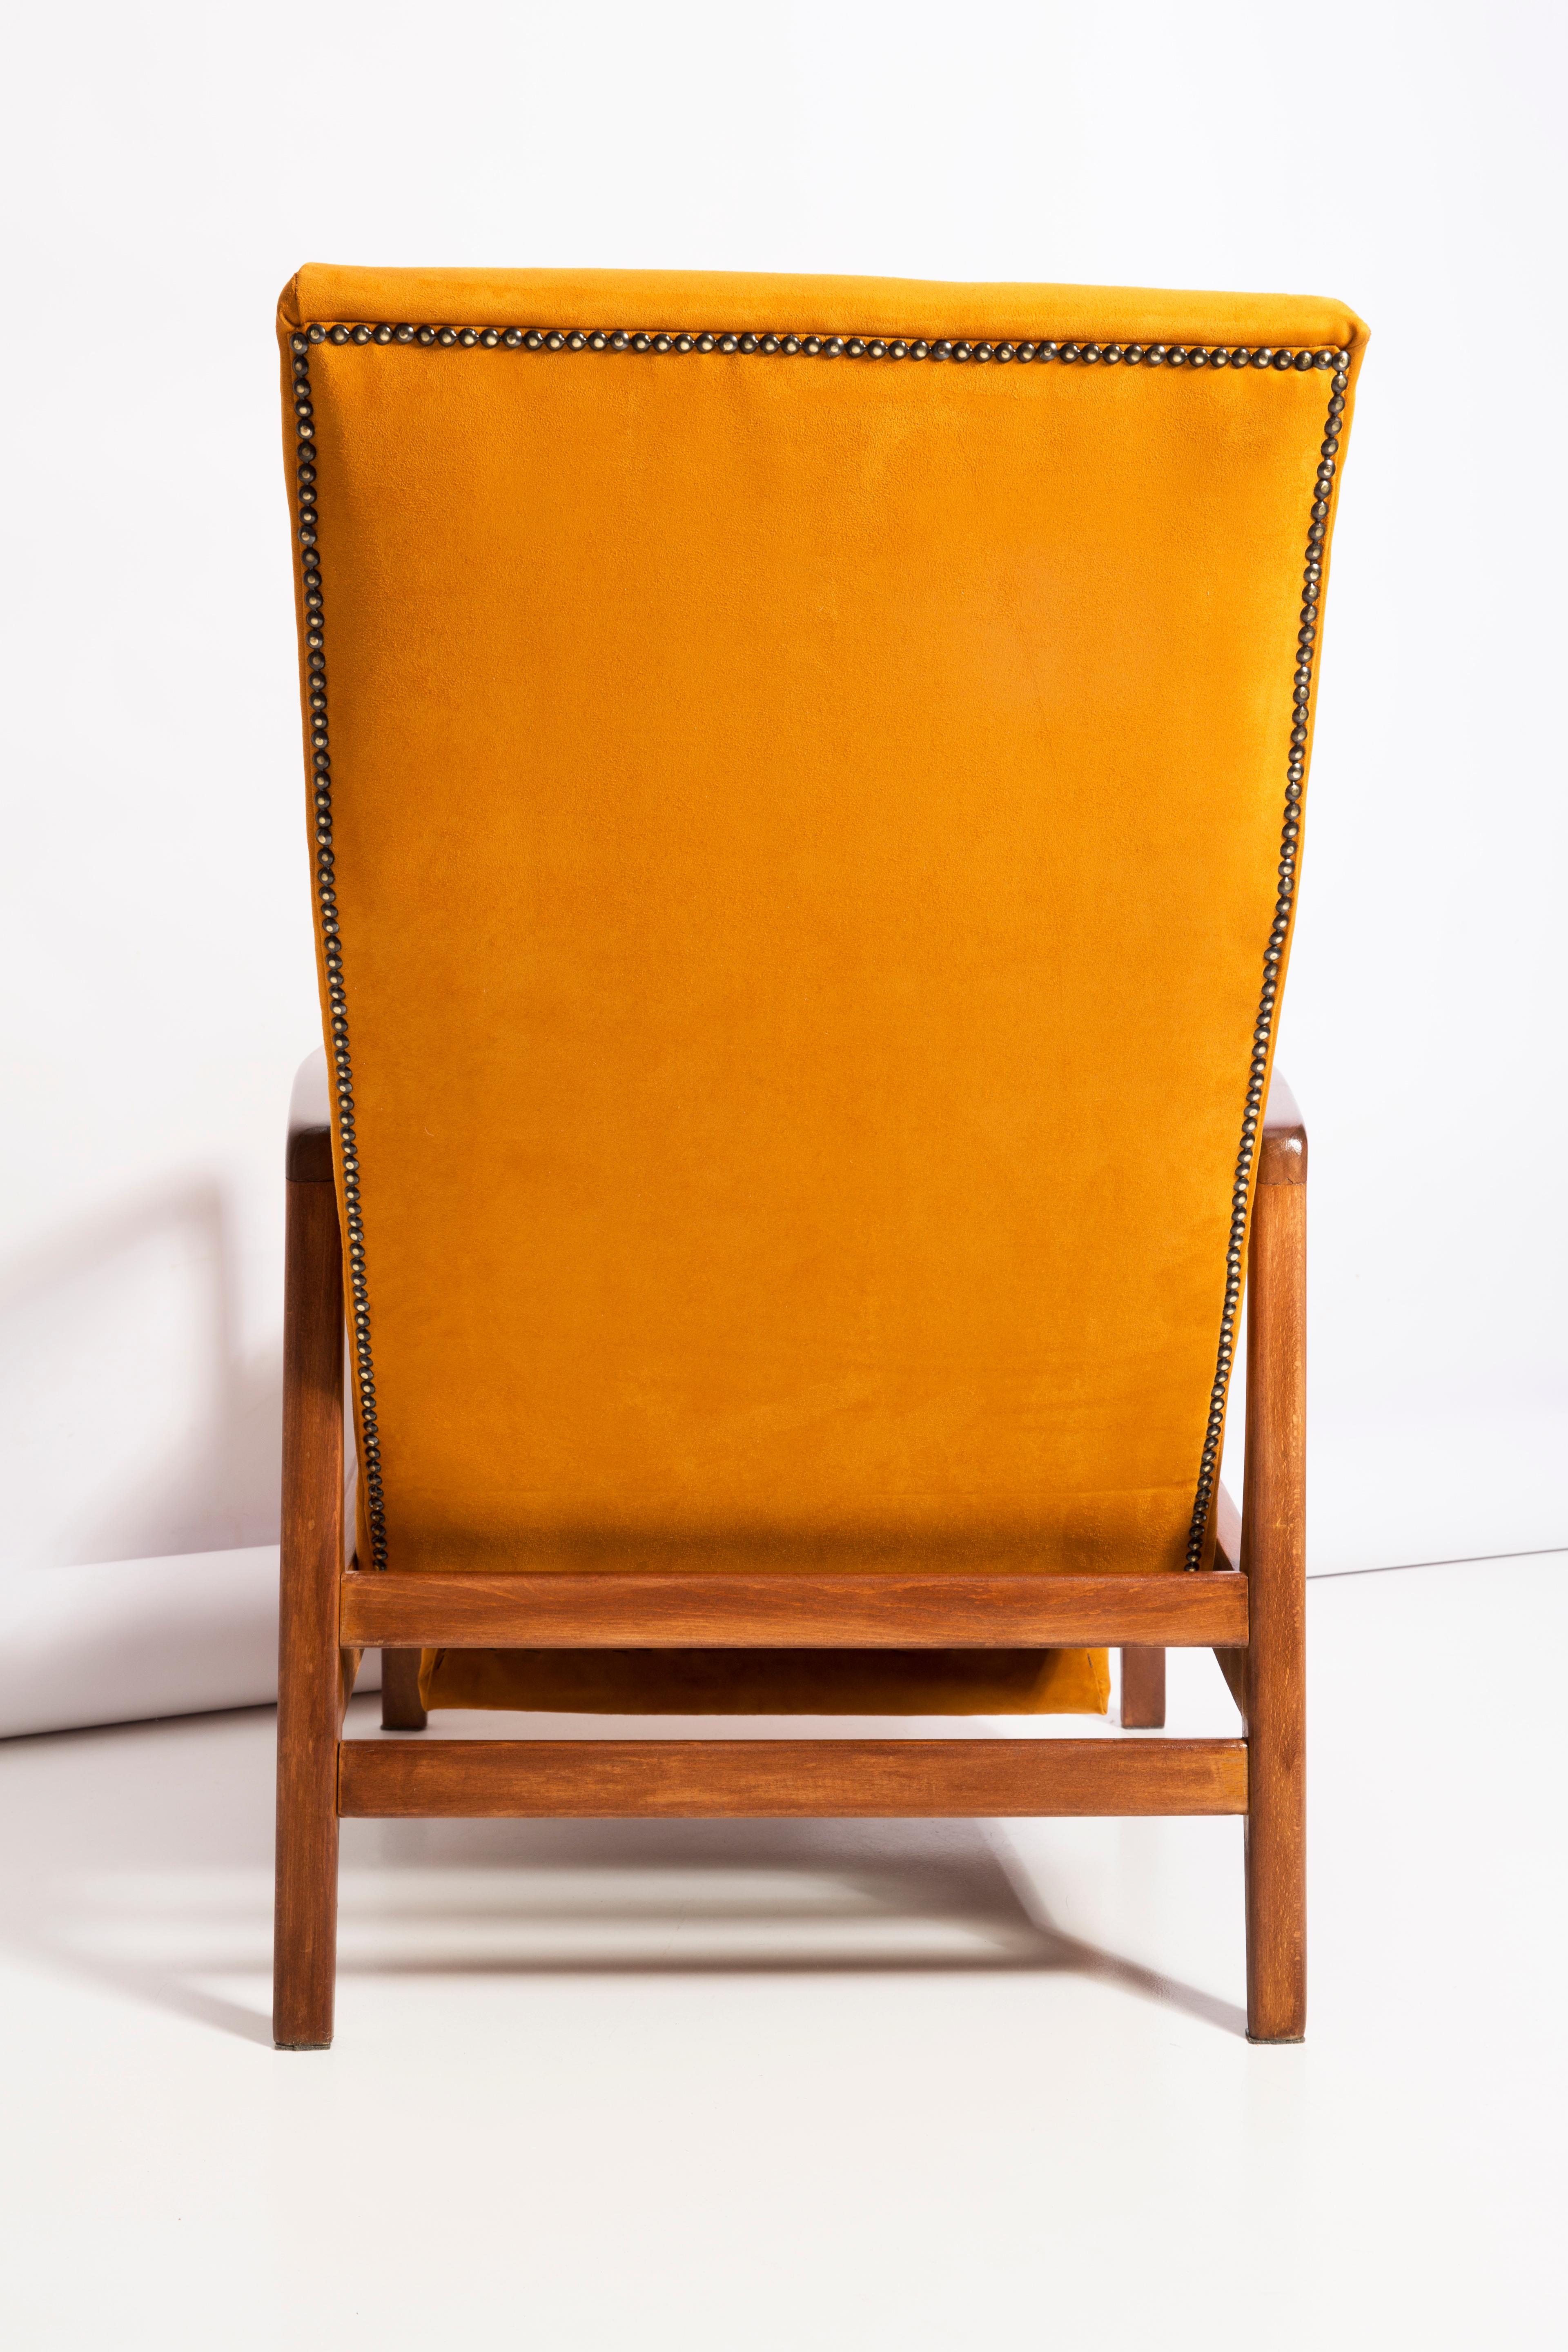 20th Century Yellow Fold-Out Armchair, Europe, 1960s For Sale 11